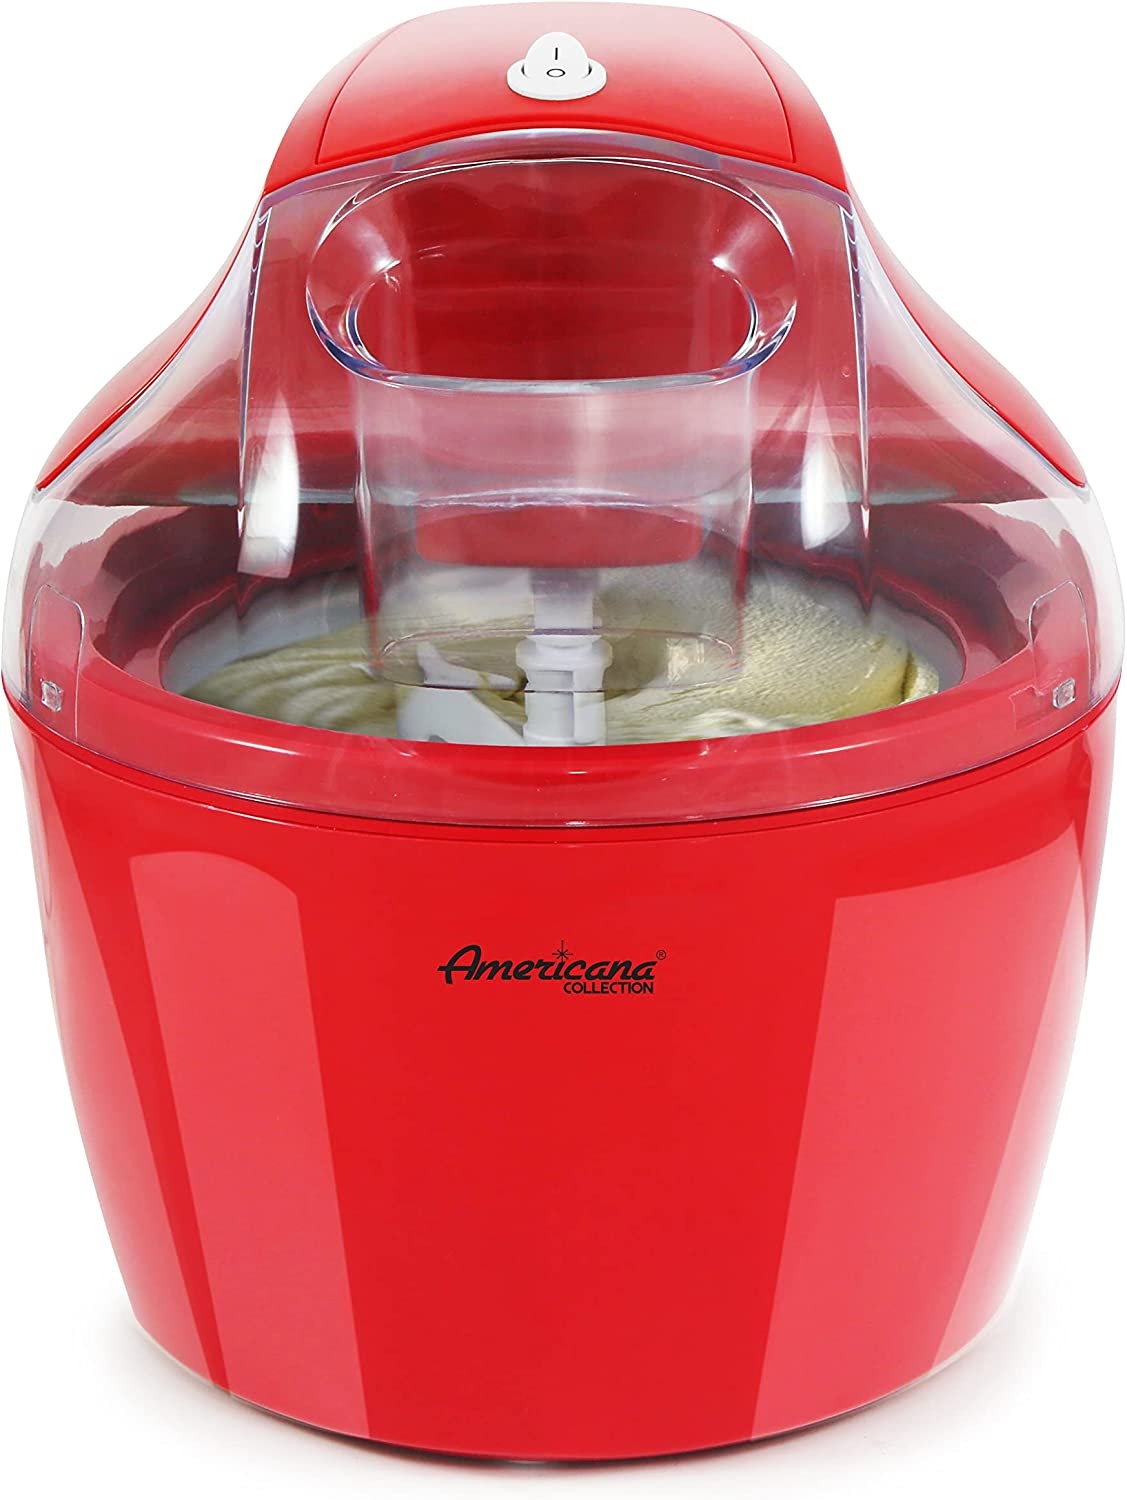 Americana EIM-1400R 1.5 Qt Freezer Bowl Automatic Easy Homemade Electric Ice Cream Maker, Ingredient Chute, On/Off Switch, No